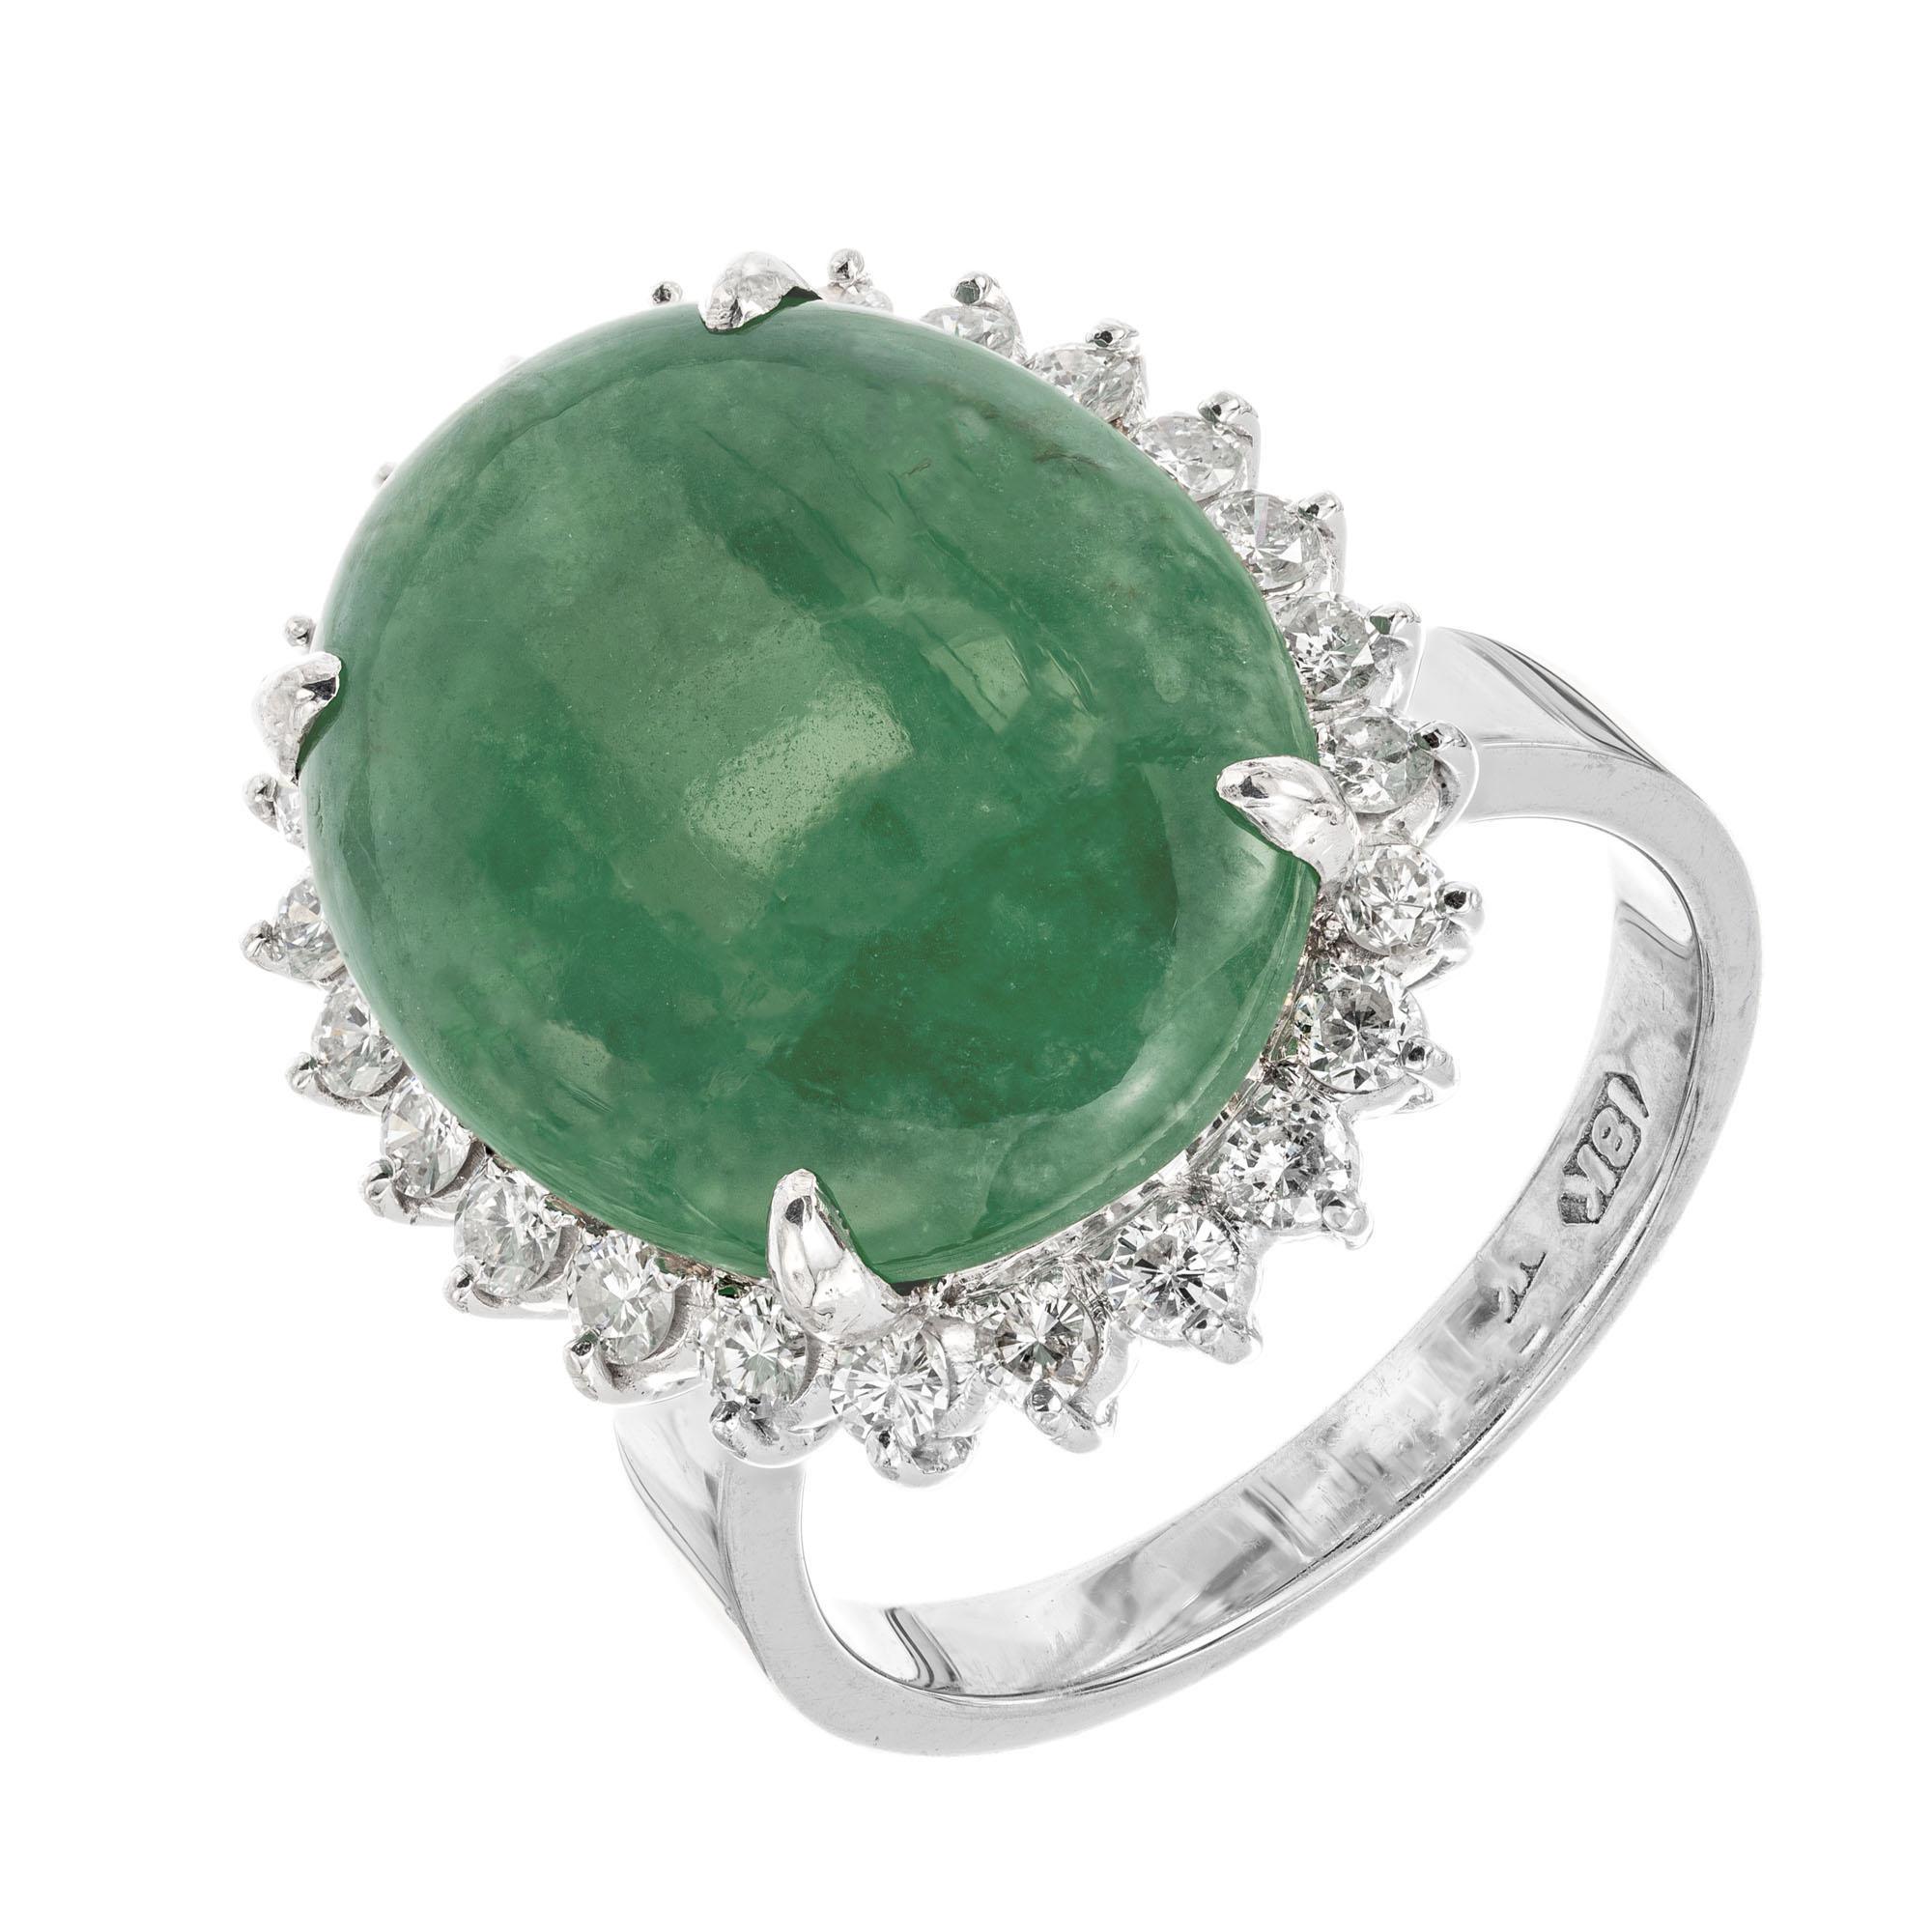 Oval jade and diamond cocktail ring. GIA certified natural untreated A grade jadeite jade center oval cabochon with a halo of round brilliant cut diamonds in a handmade 18k white gold ring.

1 oval cabochon green jade, approx. 8.95cts GIA